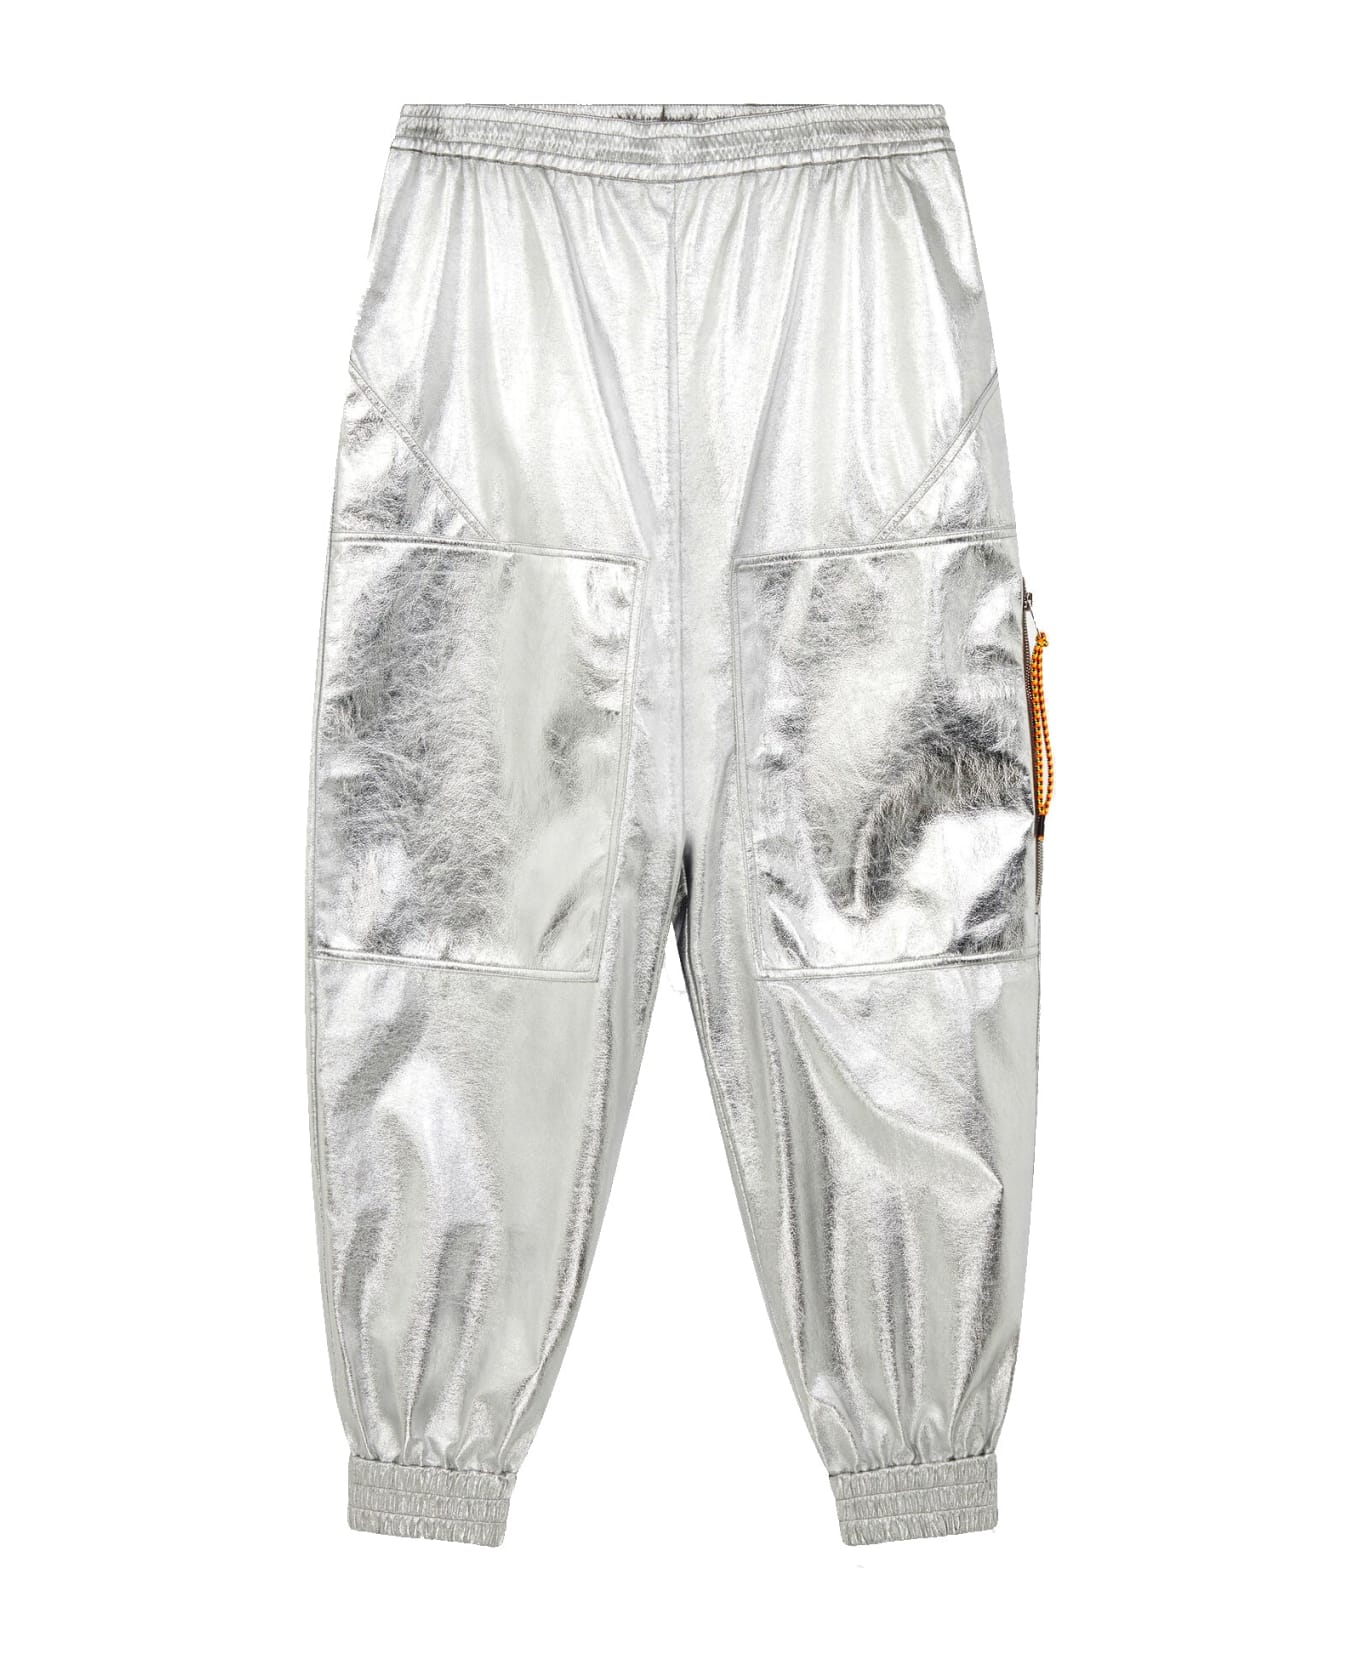 Stella McCartney Silver Coated Trousers - Silver